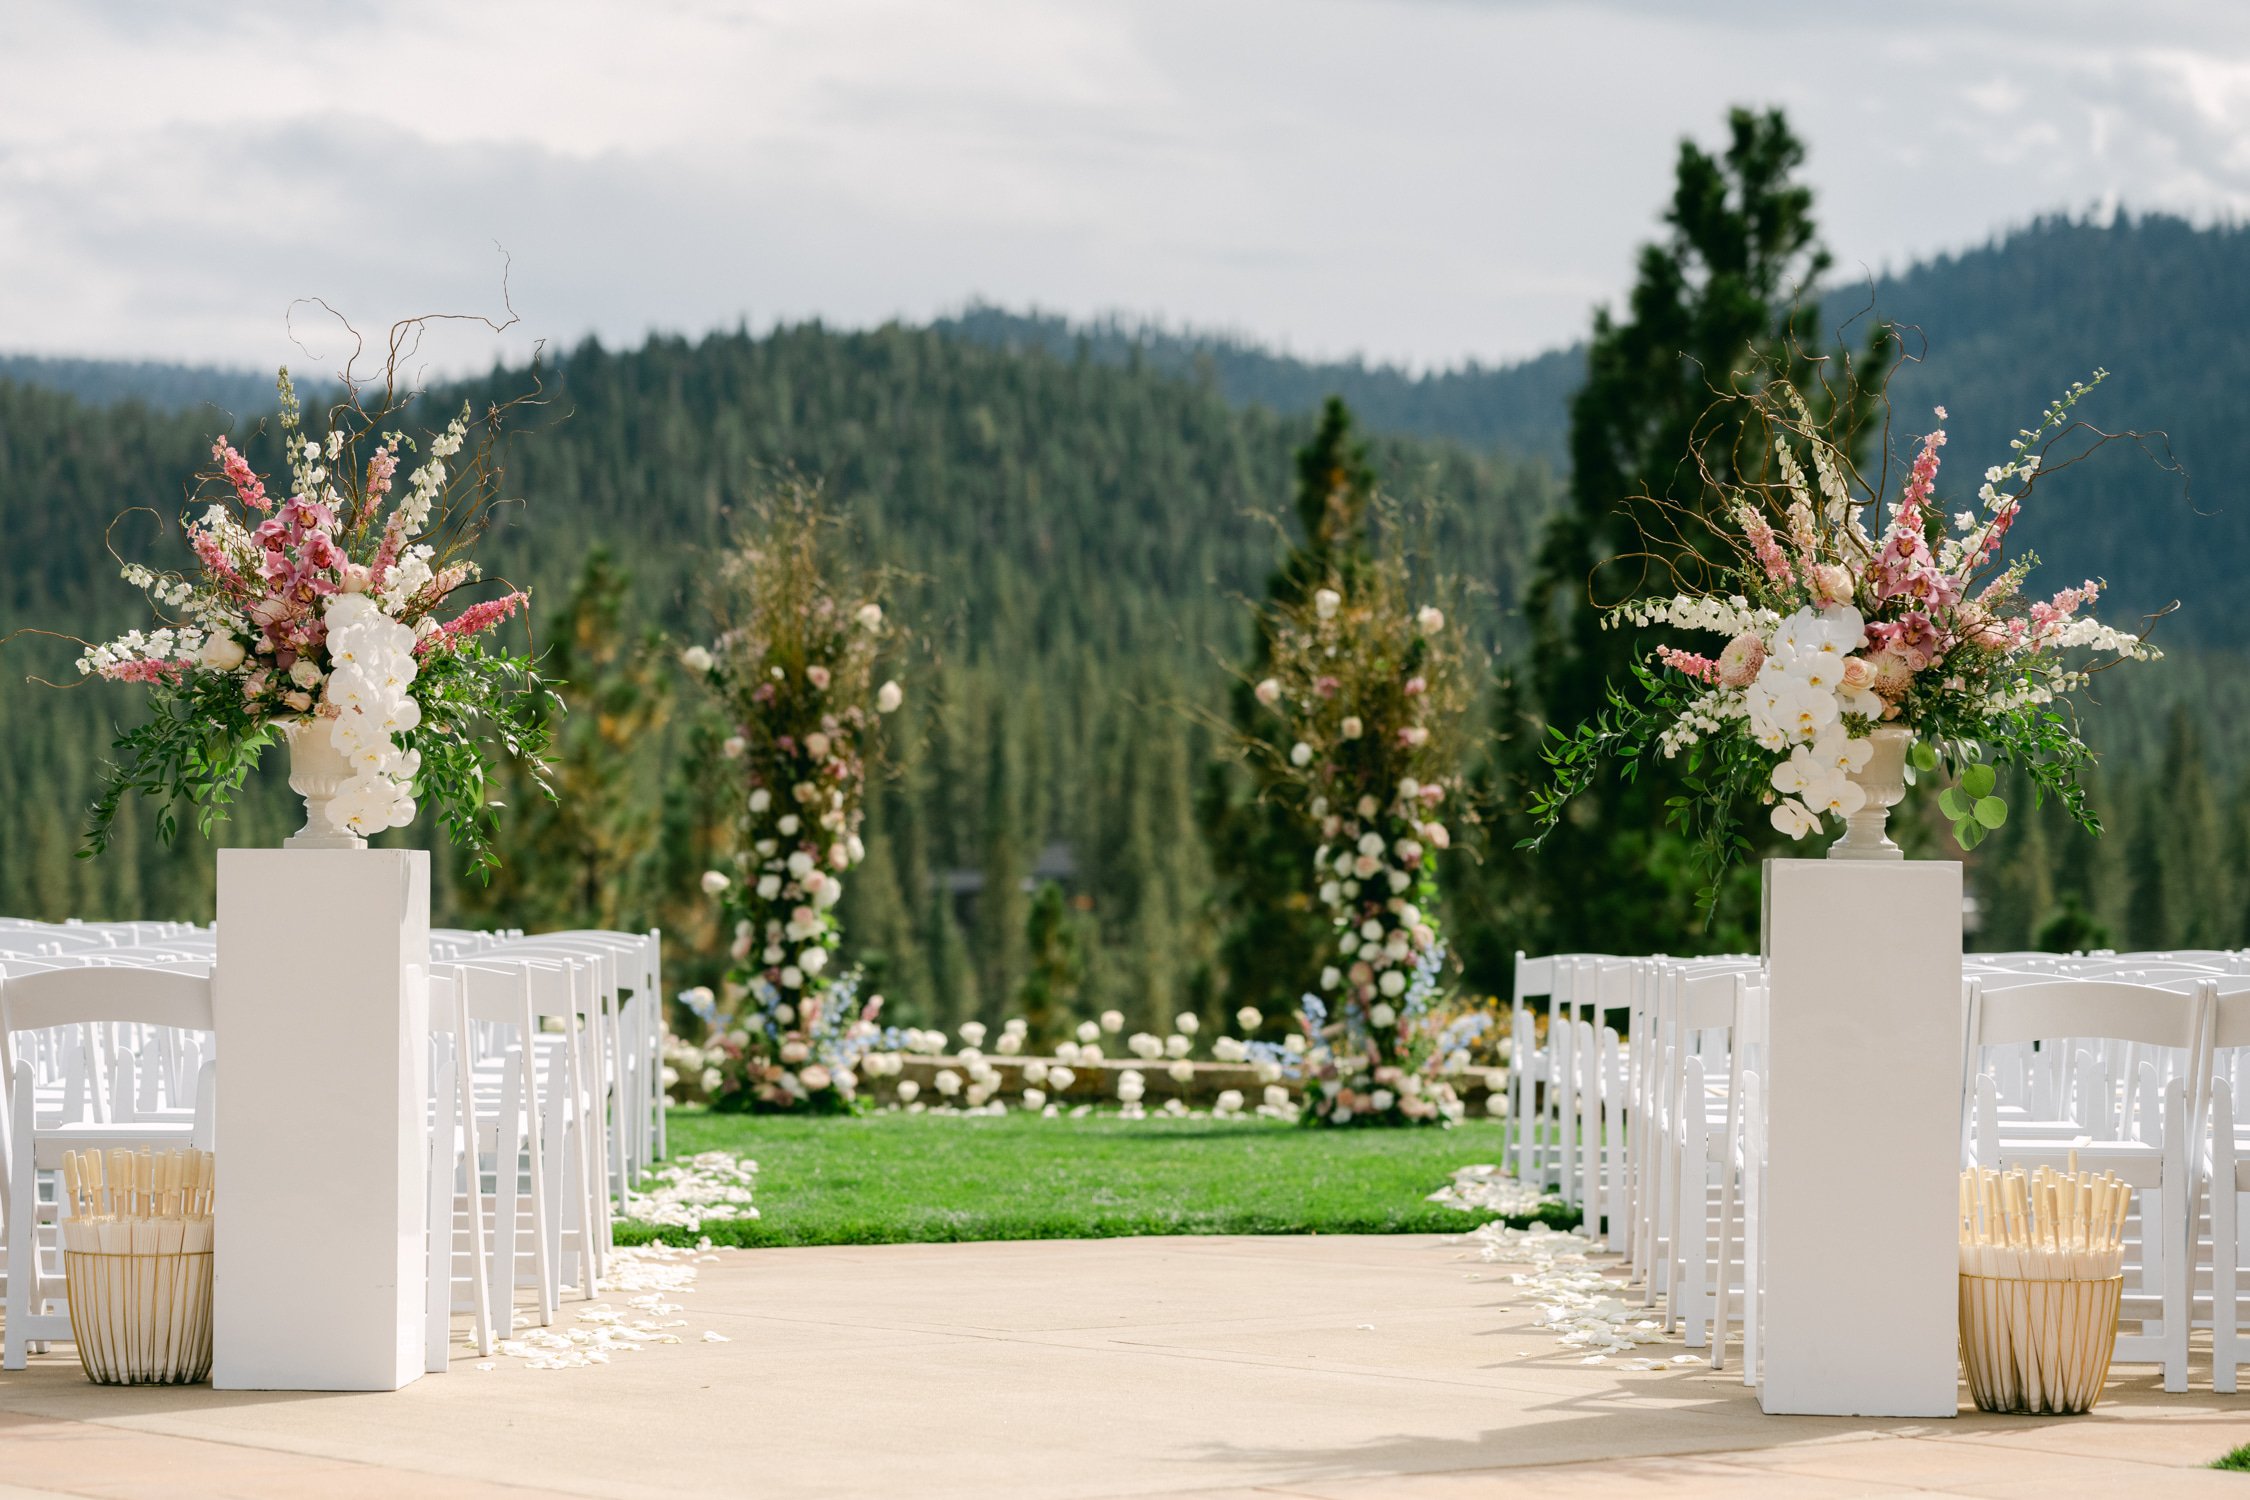 Martis Camp Wedding, photo of the outdoor wedding ceremony venue with simple flower setup by the mountains